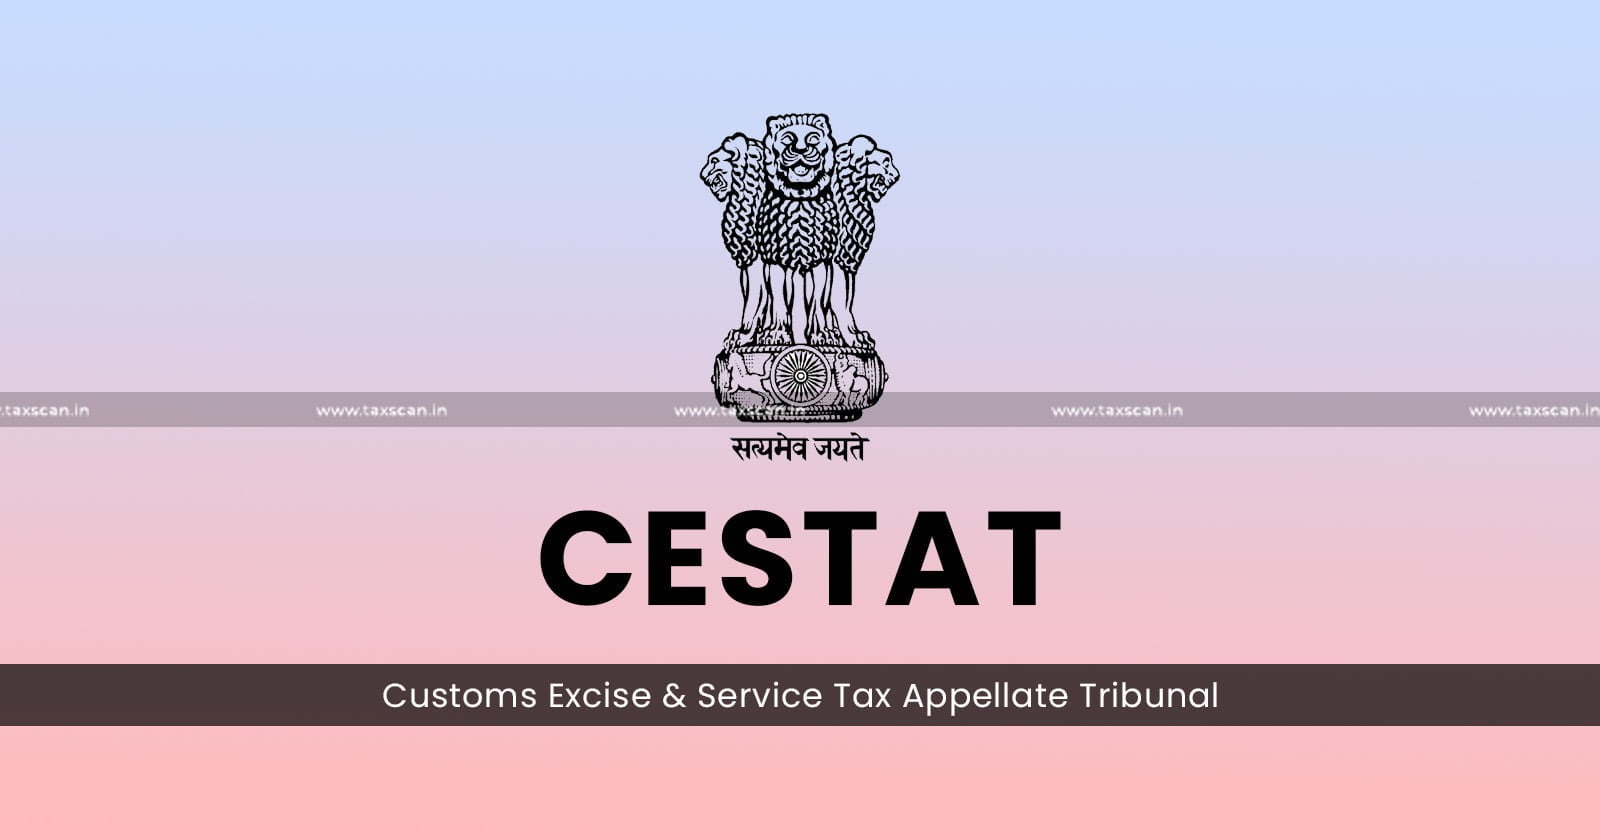 Copy Right Service - Related - Original Artistic Works - Excluded - Payment of Service Tax - CESTAT - taxscan